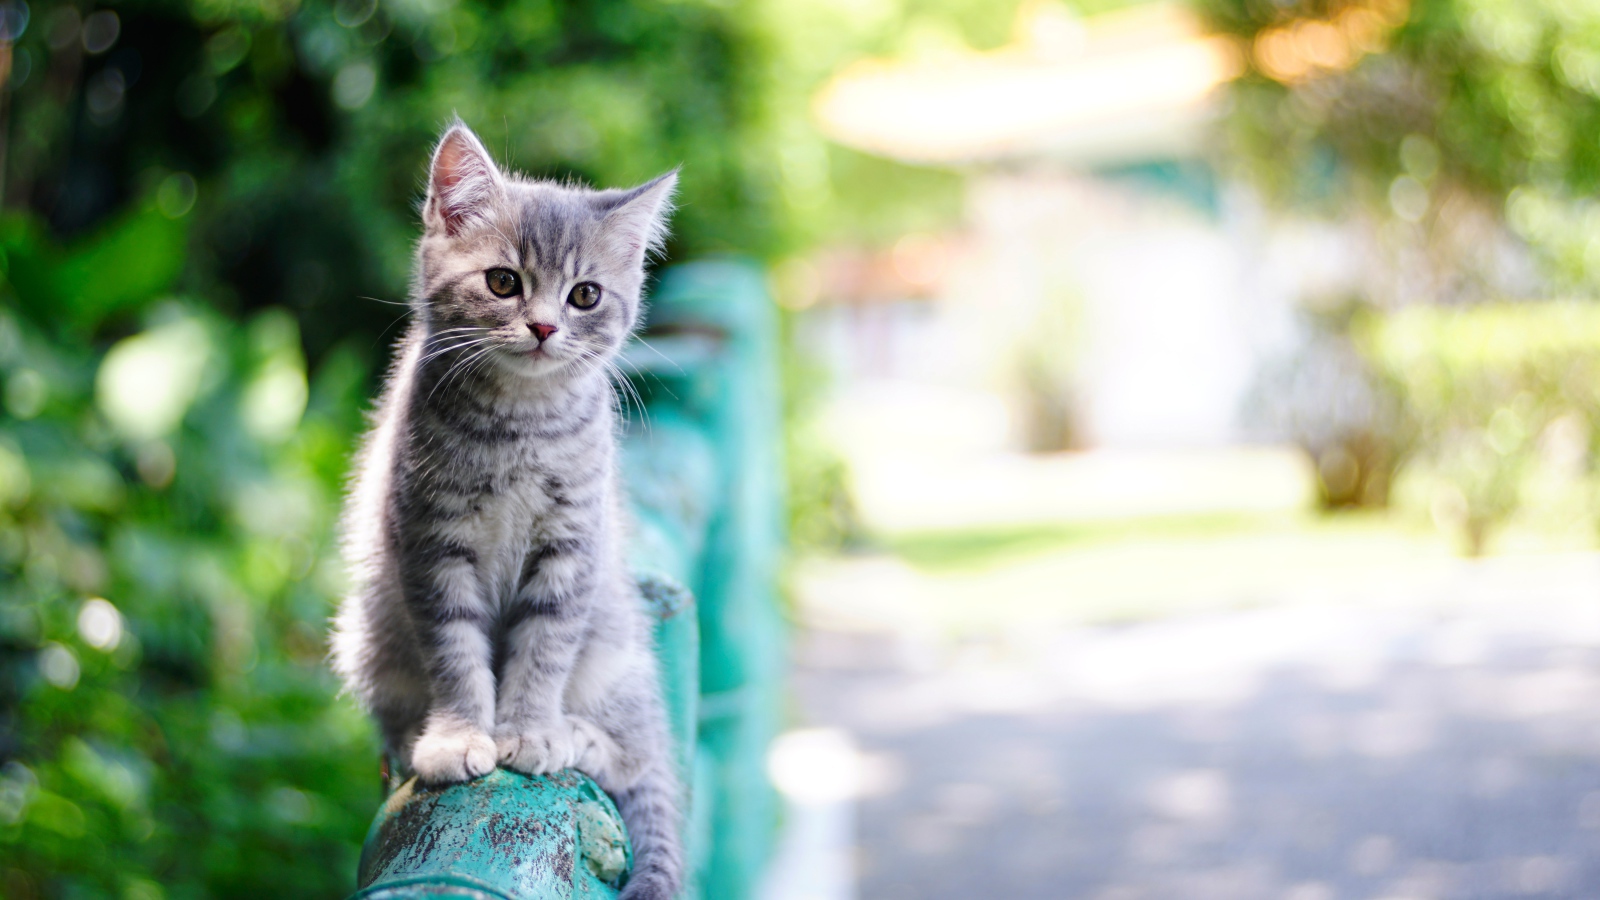 A small gray kitten is sitting on the railing